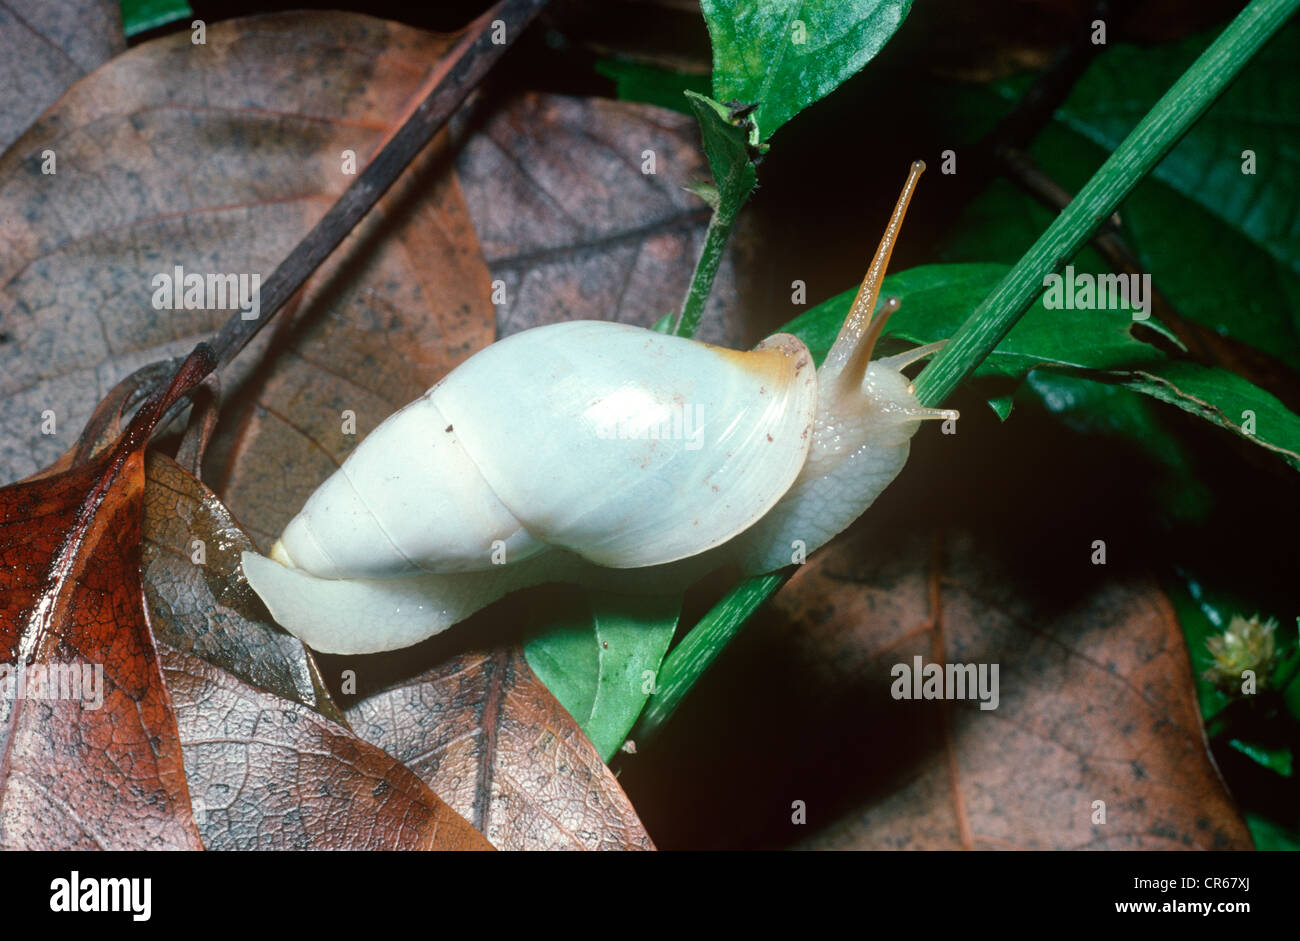 Snail crawling up a stem in rainforest Trinidad Stock Photo